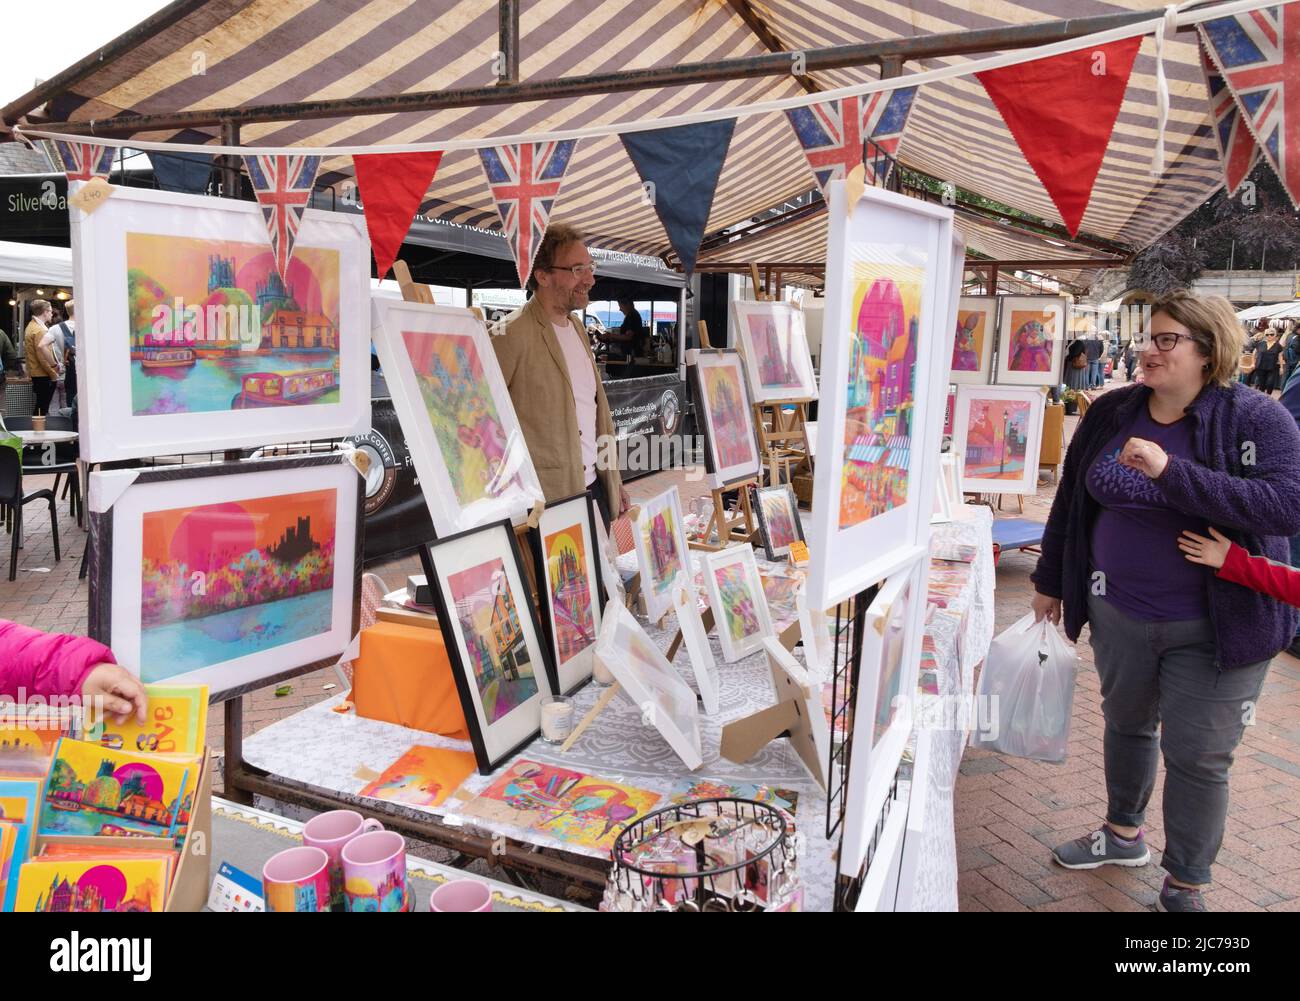 Woman shopping for a picture at an artist's market stall, Ely market, Ely Cambridgeshire UK Stock Photo